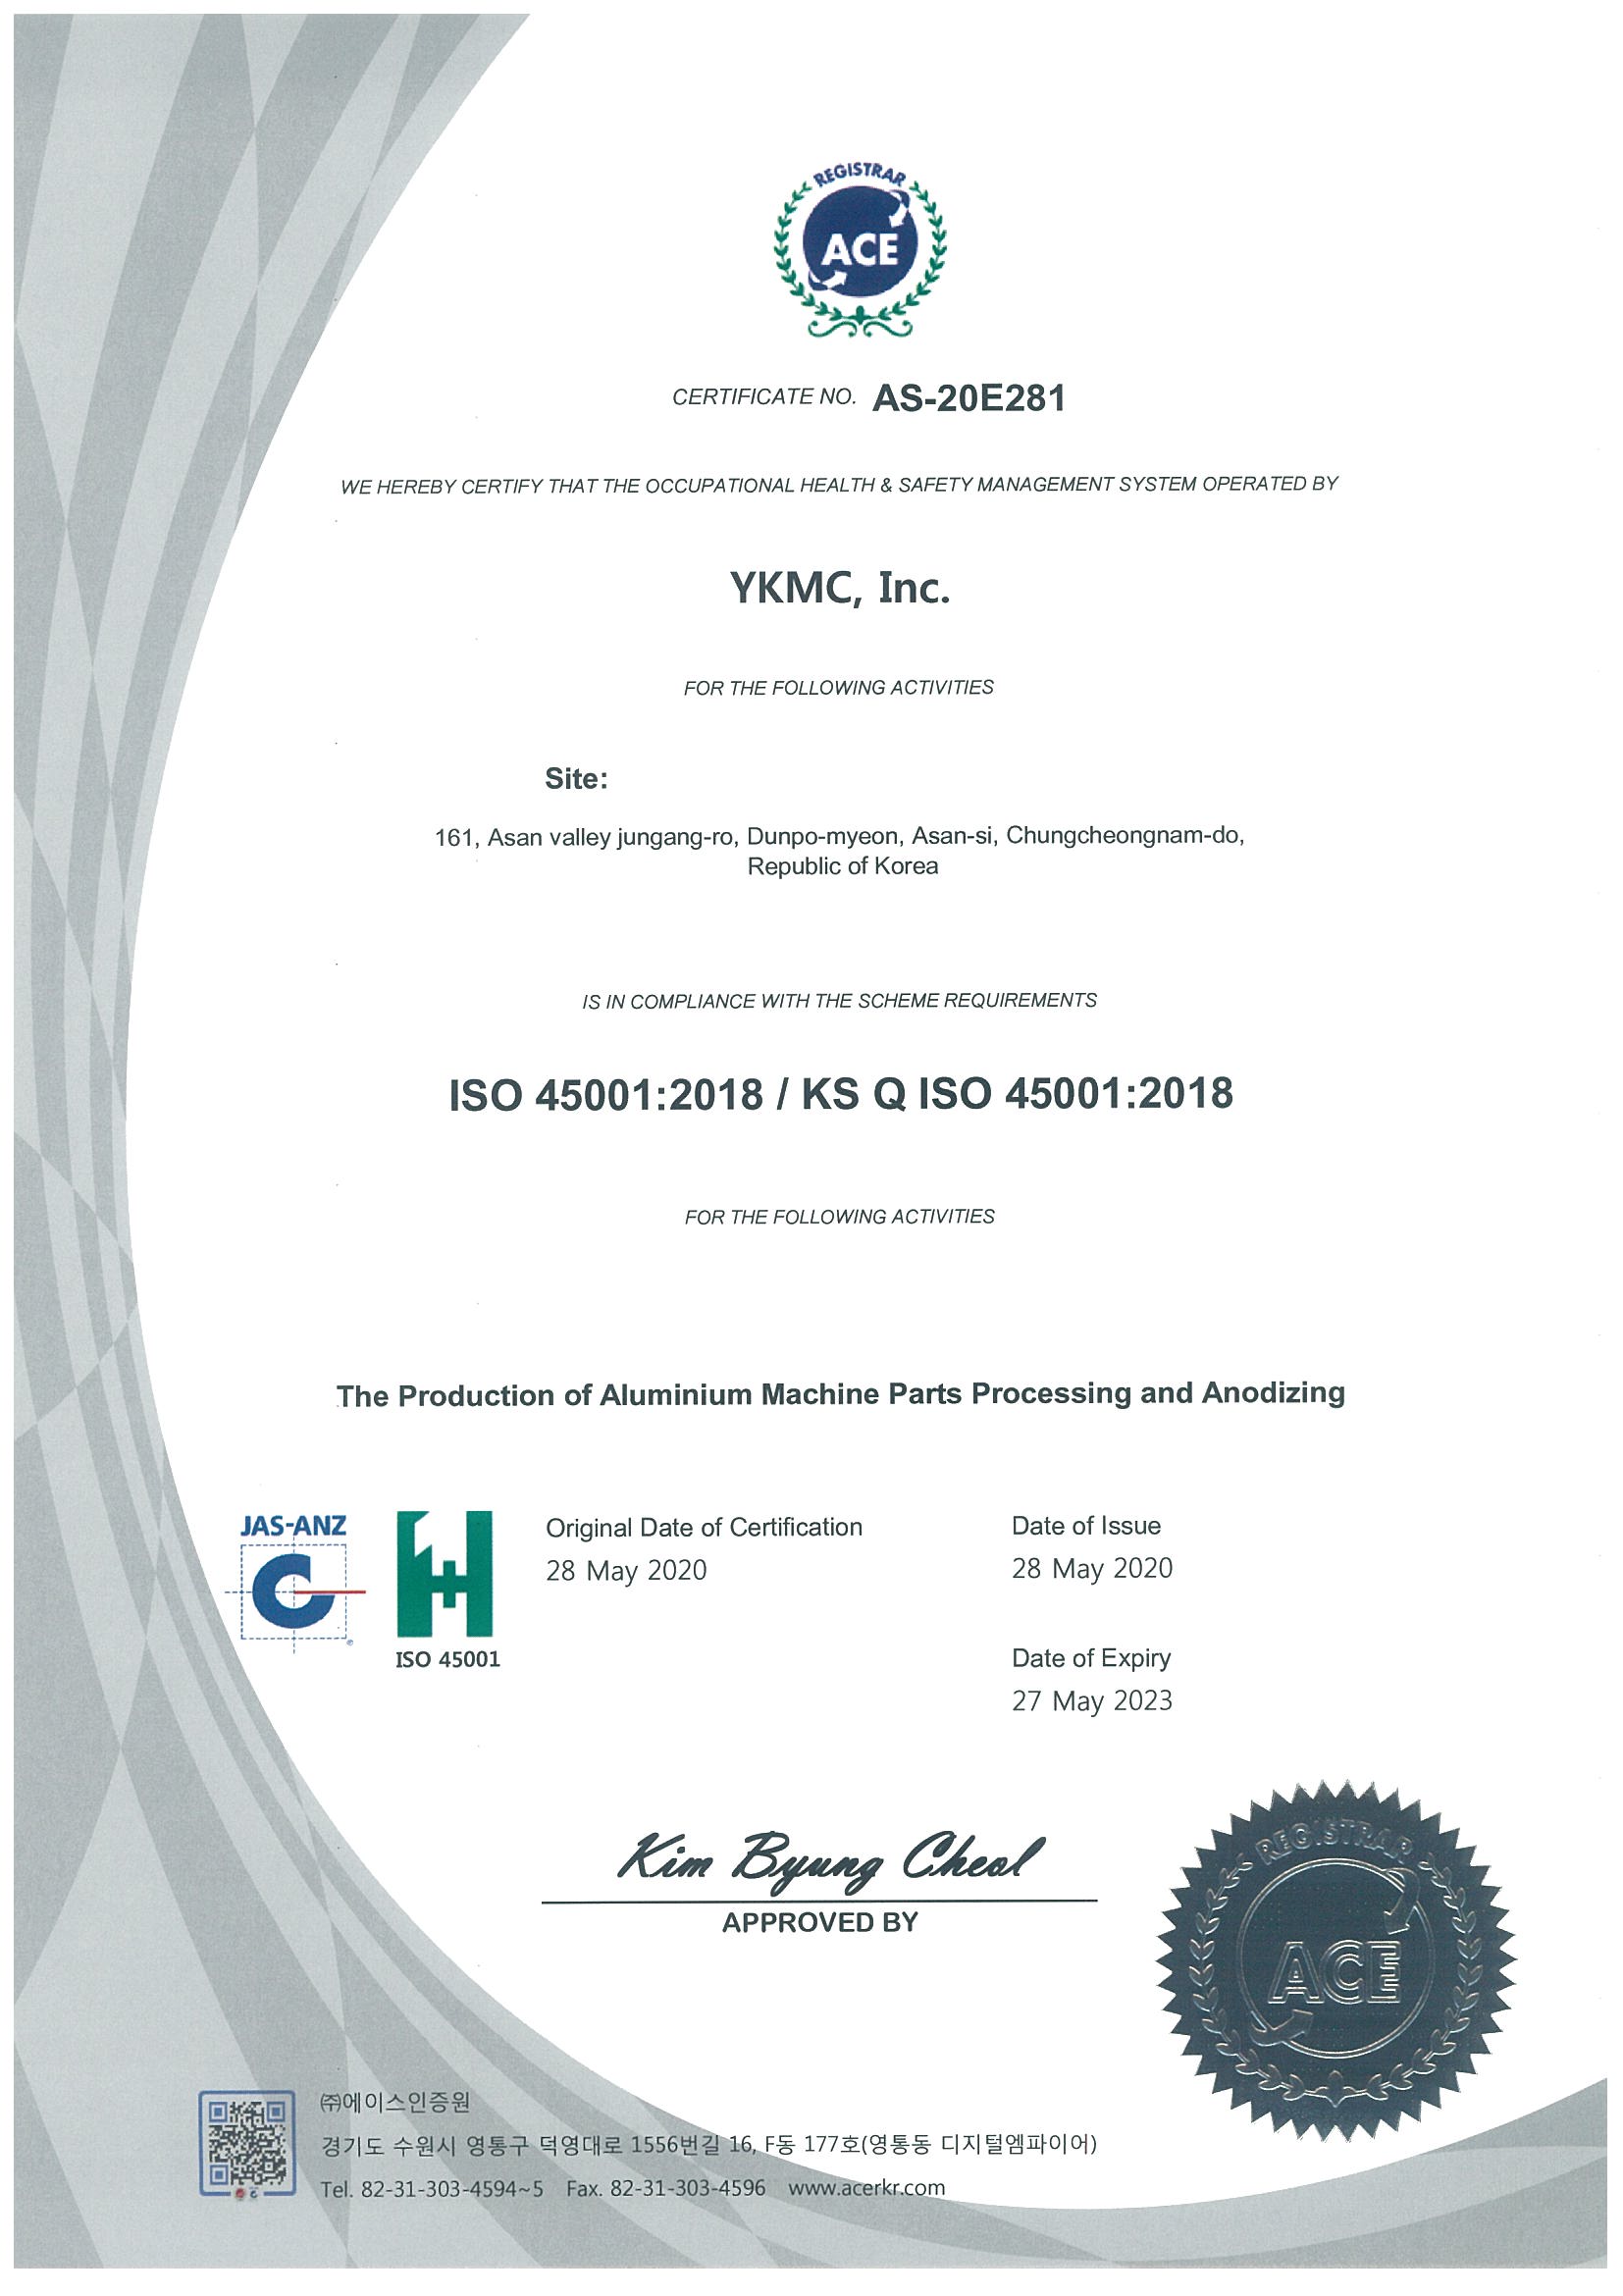 ISO45001 Health and Safety Management